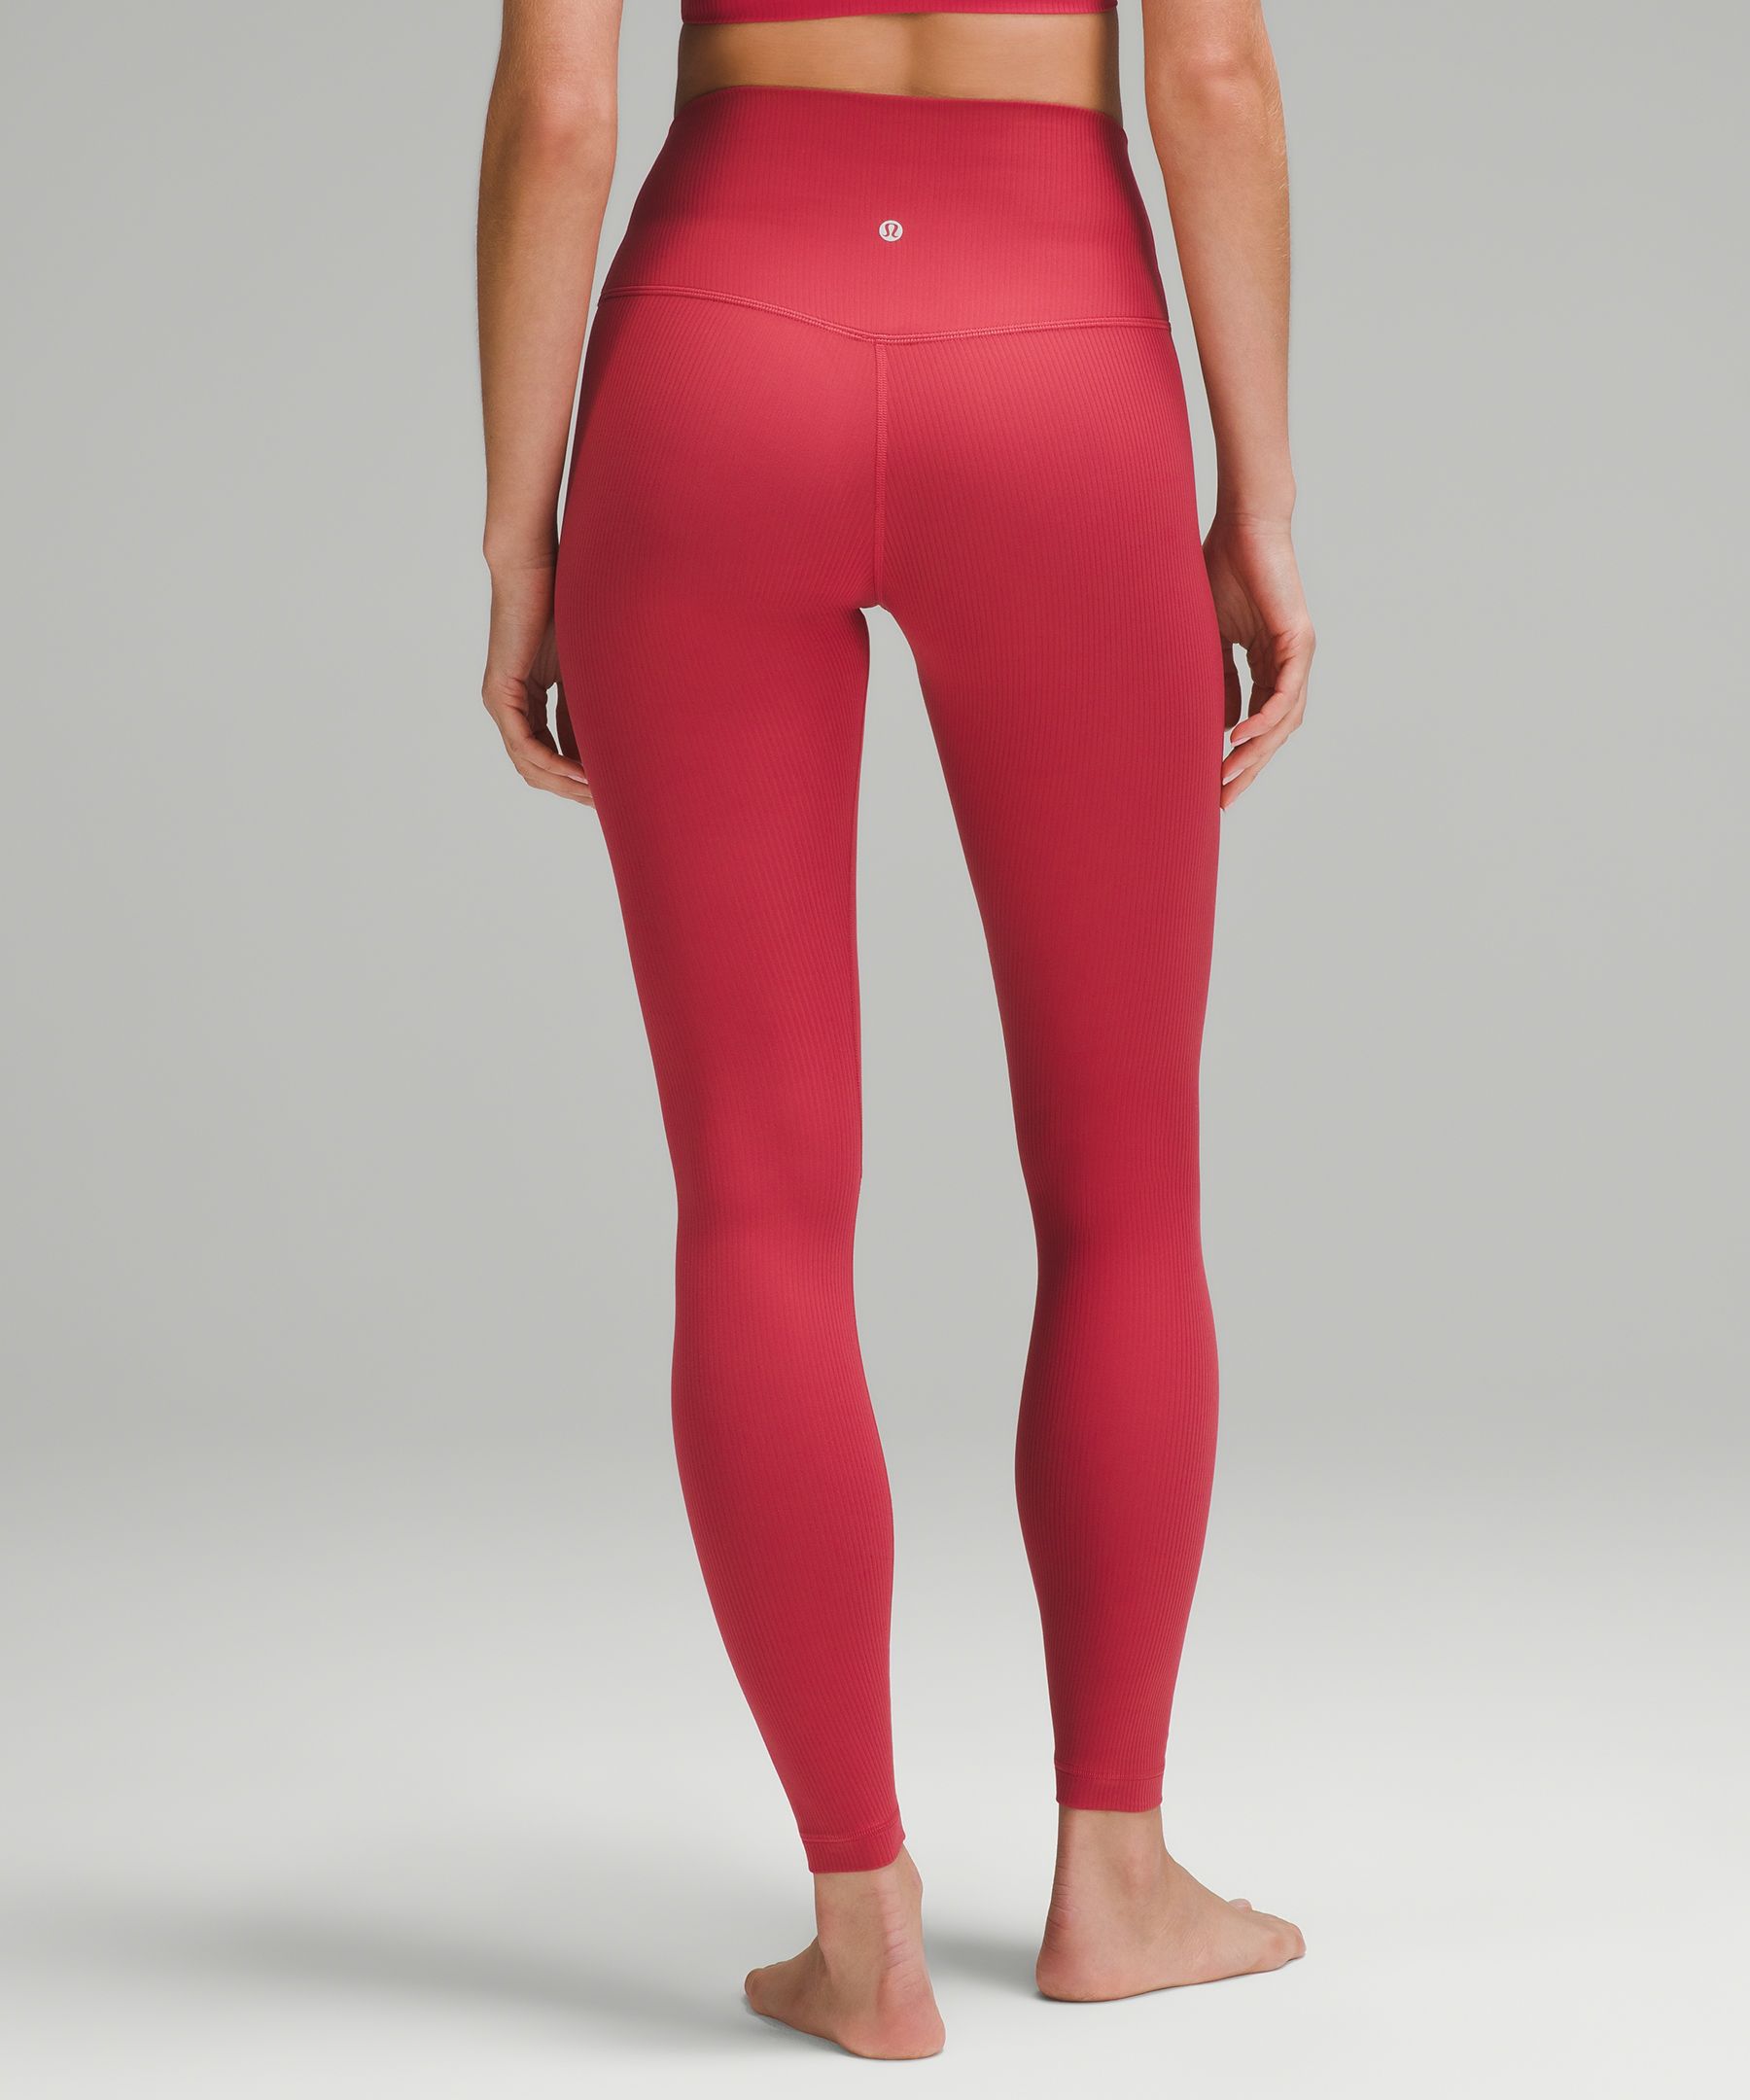 Looking For: Lululemon Align Pant II in size 6/8 in Richmond